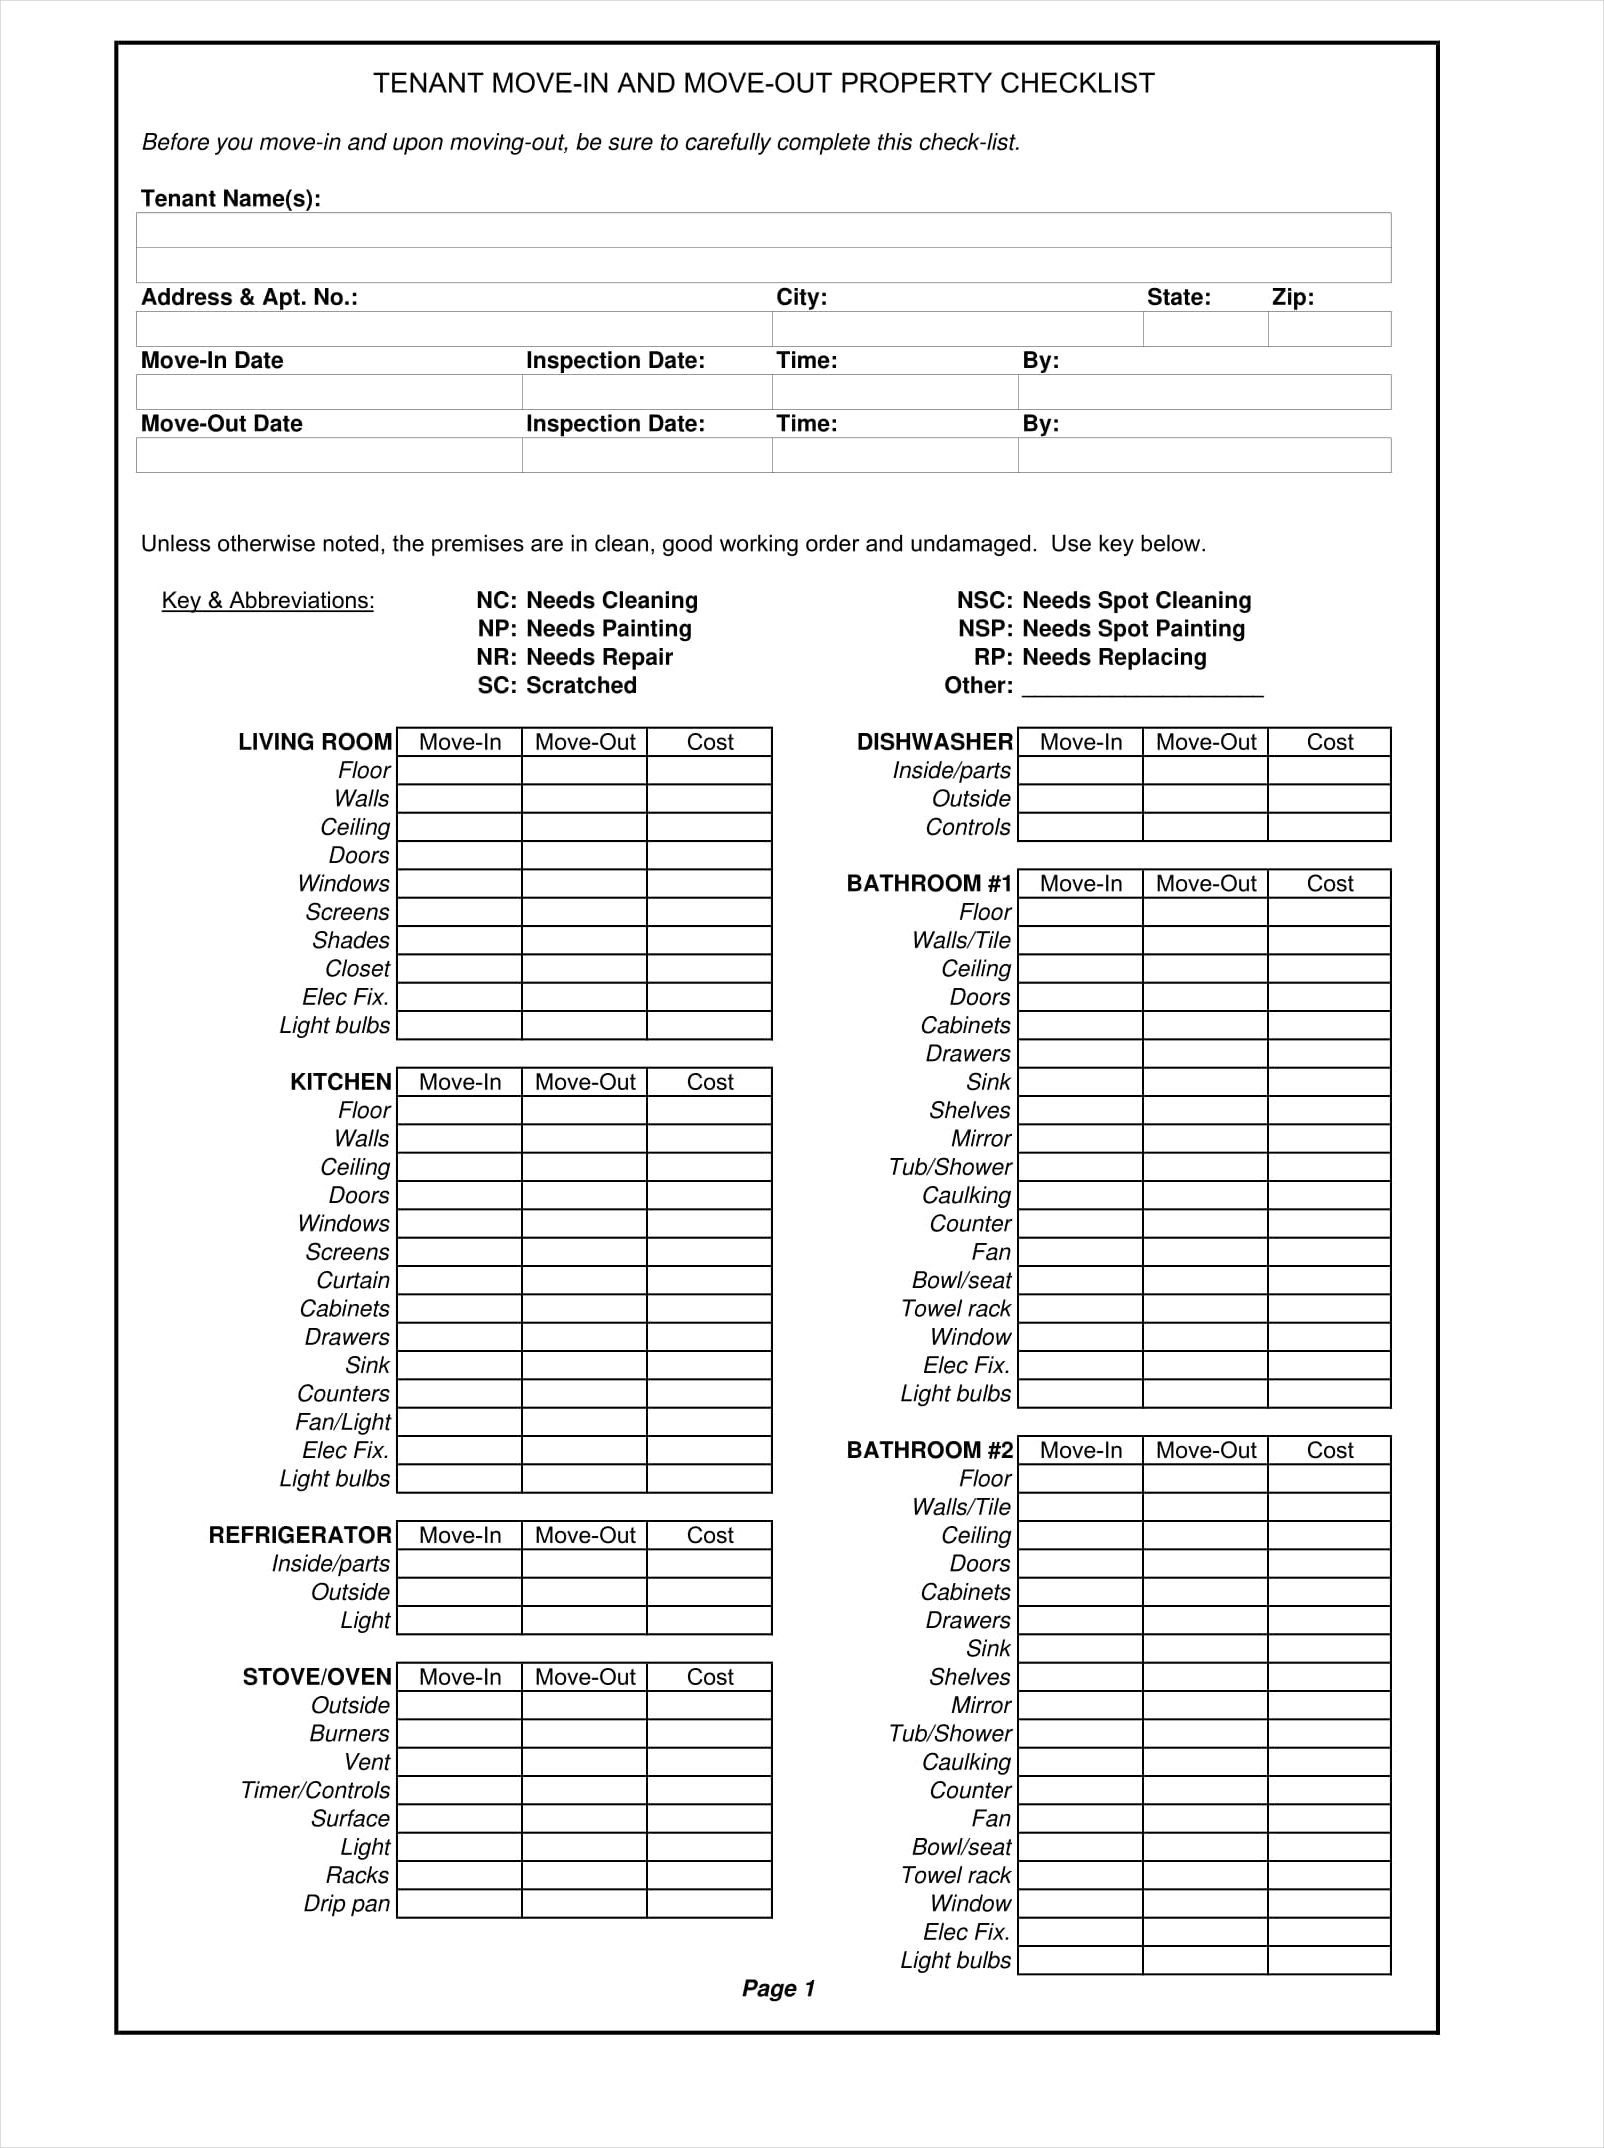 11+ Rental Checklist Examples - PDF  Examples For Tenant Move In Checklist Template With Tenant Move In Checklist Template